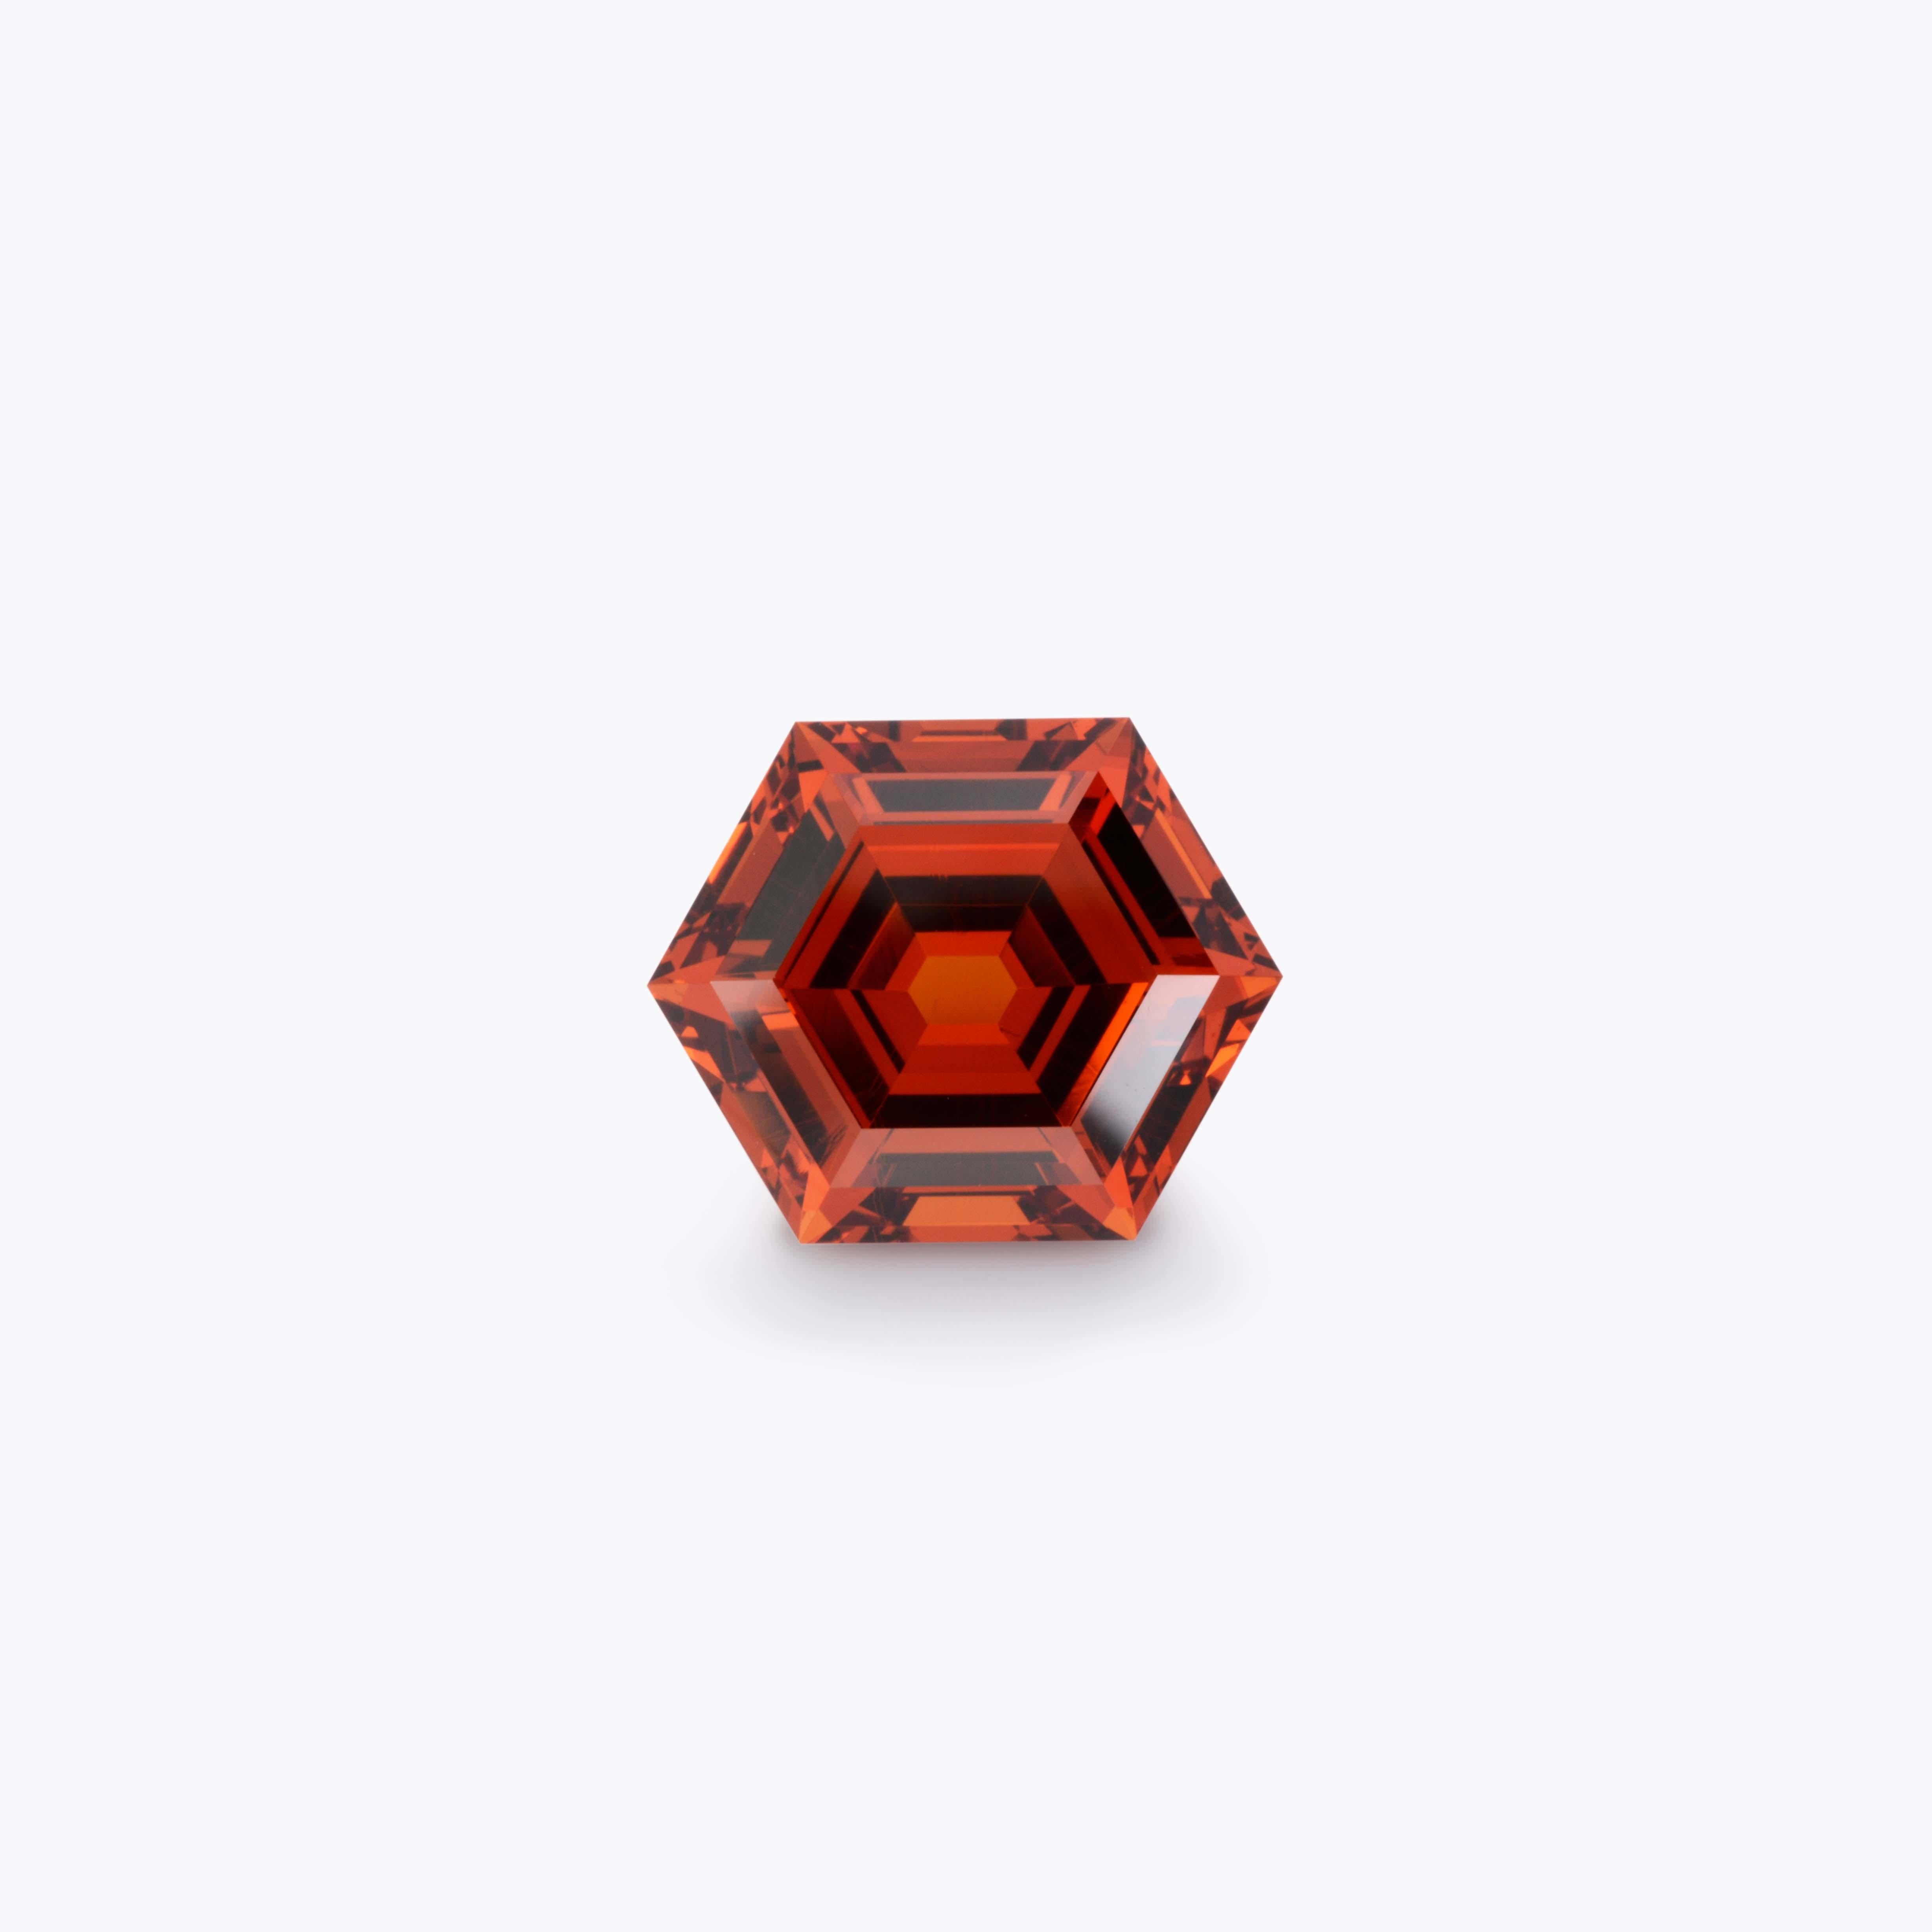 Pristine 9.59 carat Spessartite Garnet Hexagon gem, offered loose to a fine gemstone connoisseur. 
Returns are accepted and paid by us within 7 days of delivery.
We offer supreme custom jewelry work upon request. Please contact us for more